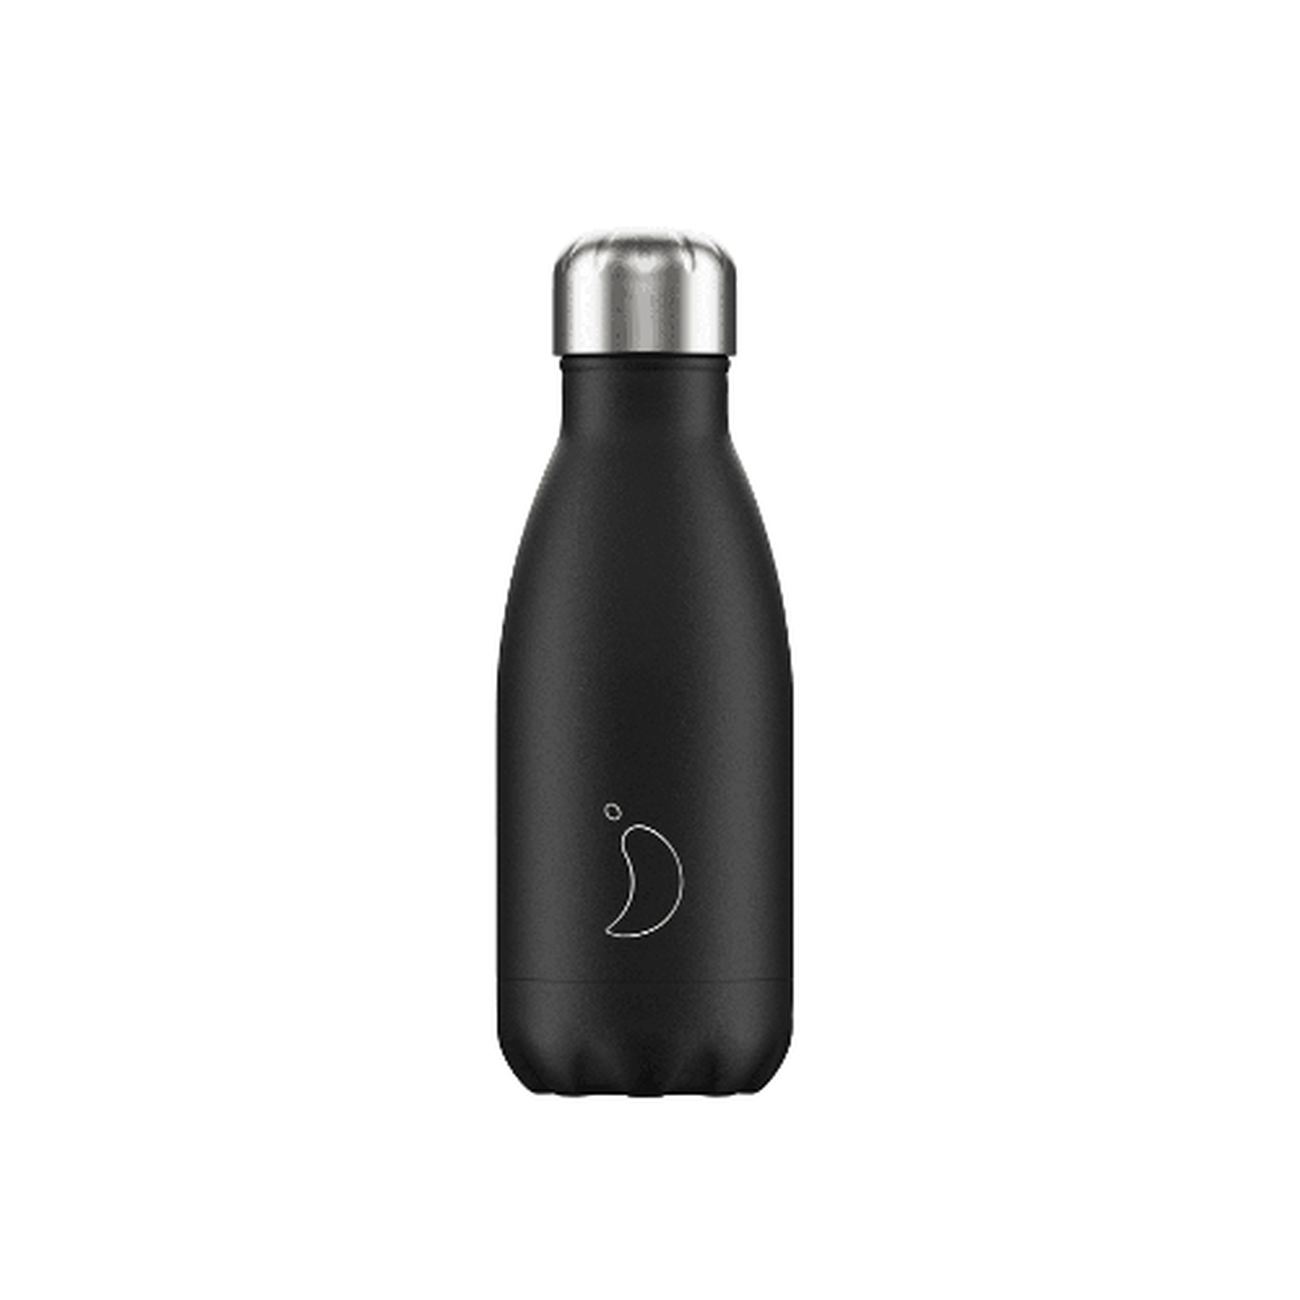 chillys-water-bottle-mono-black-260ml - Chilly's 260ml Stainless Steel Water Bottle Mono Black